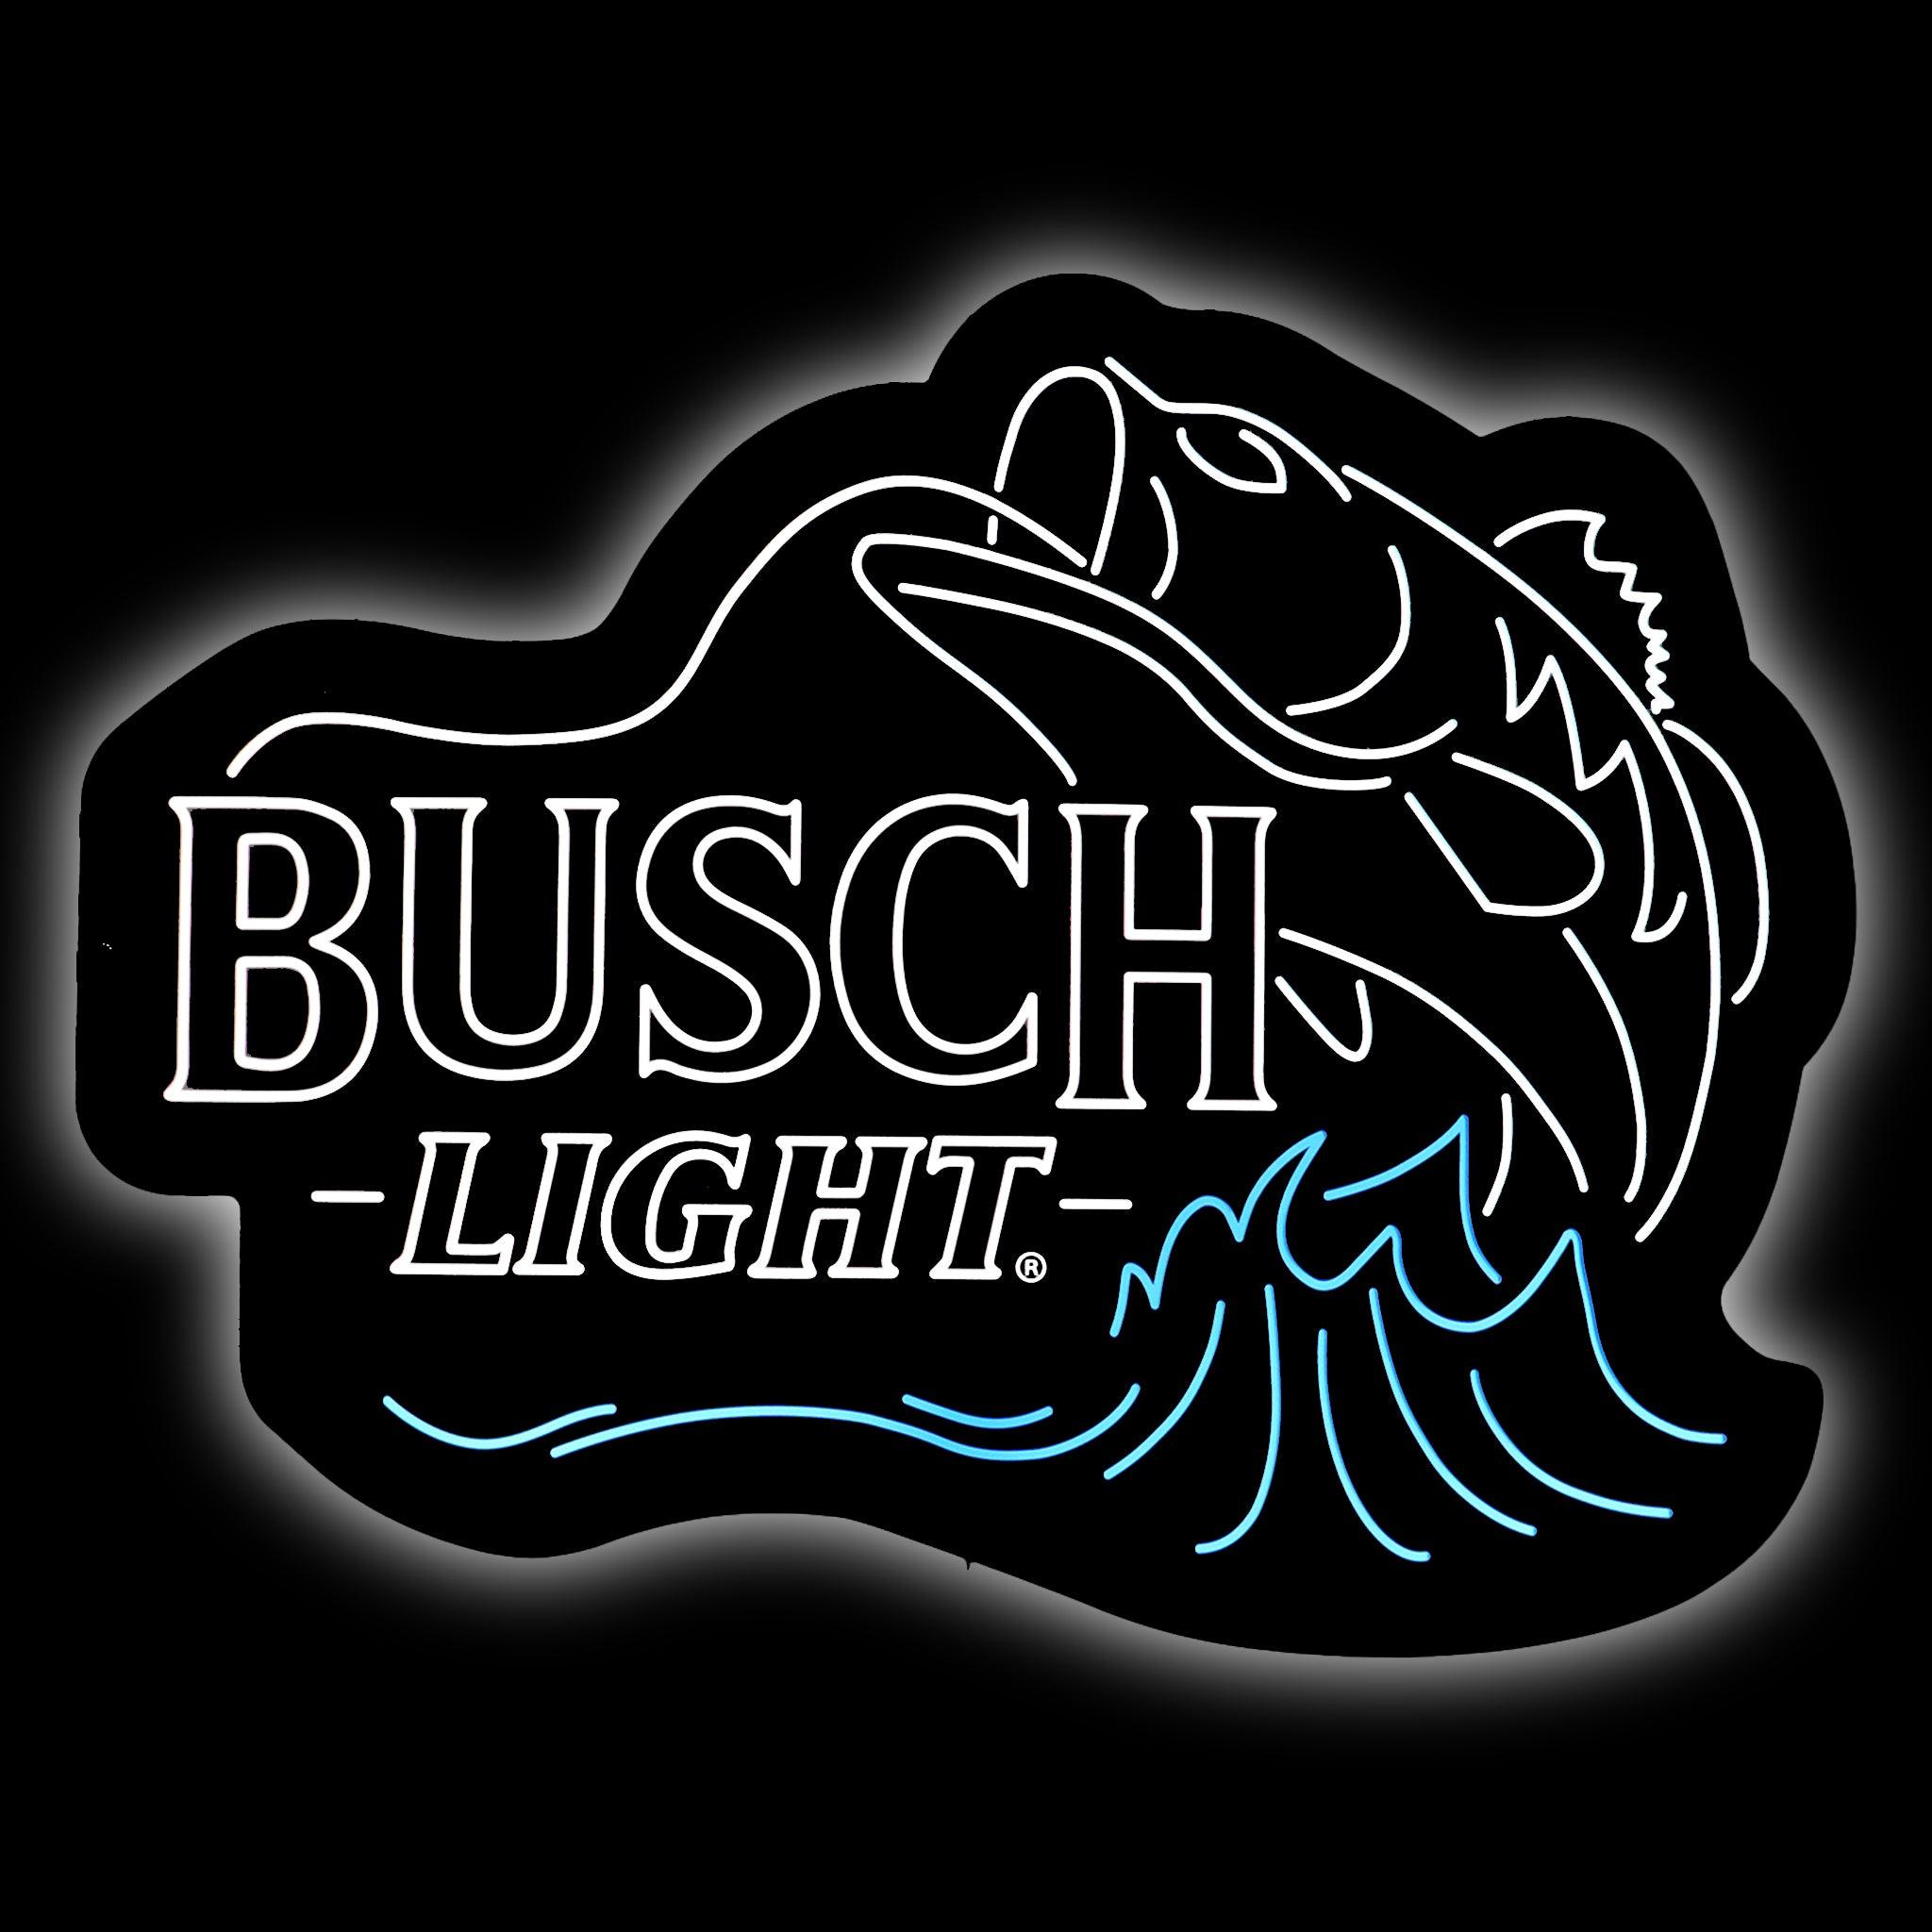 Fishing Busch Light Neon Signs For Your Bar – NeonTitle